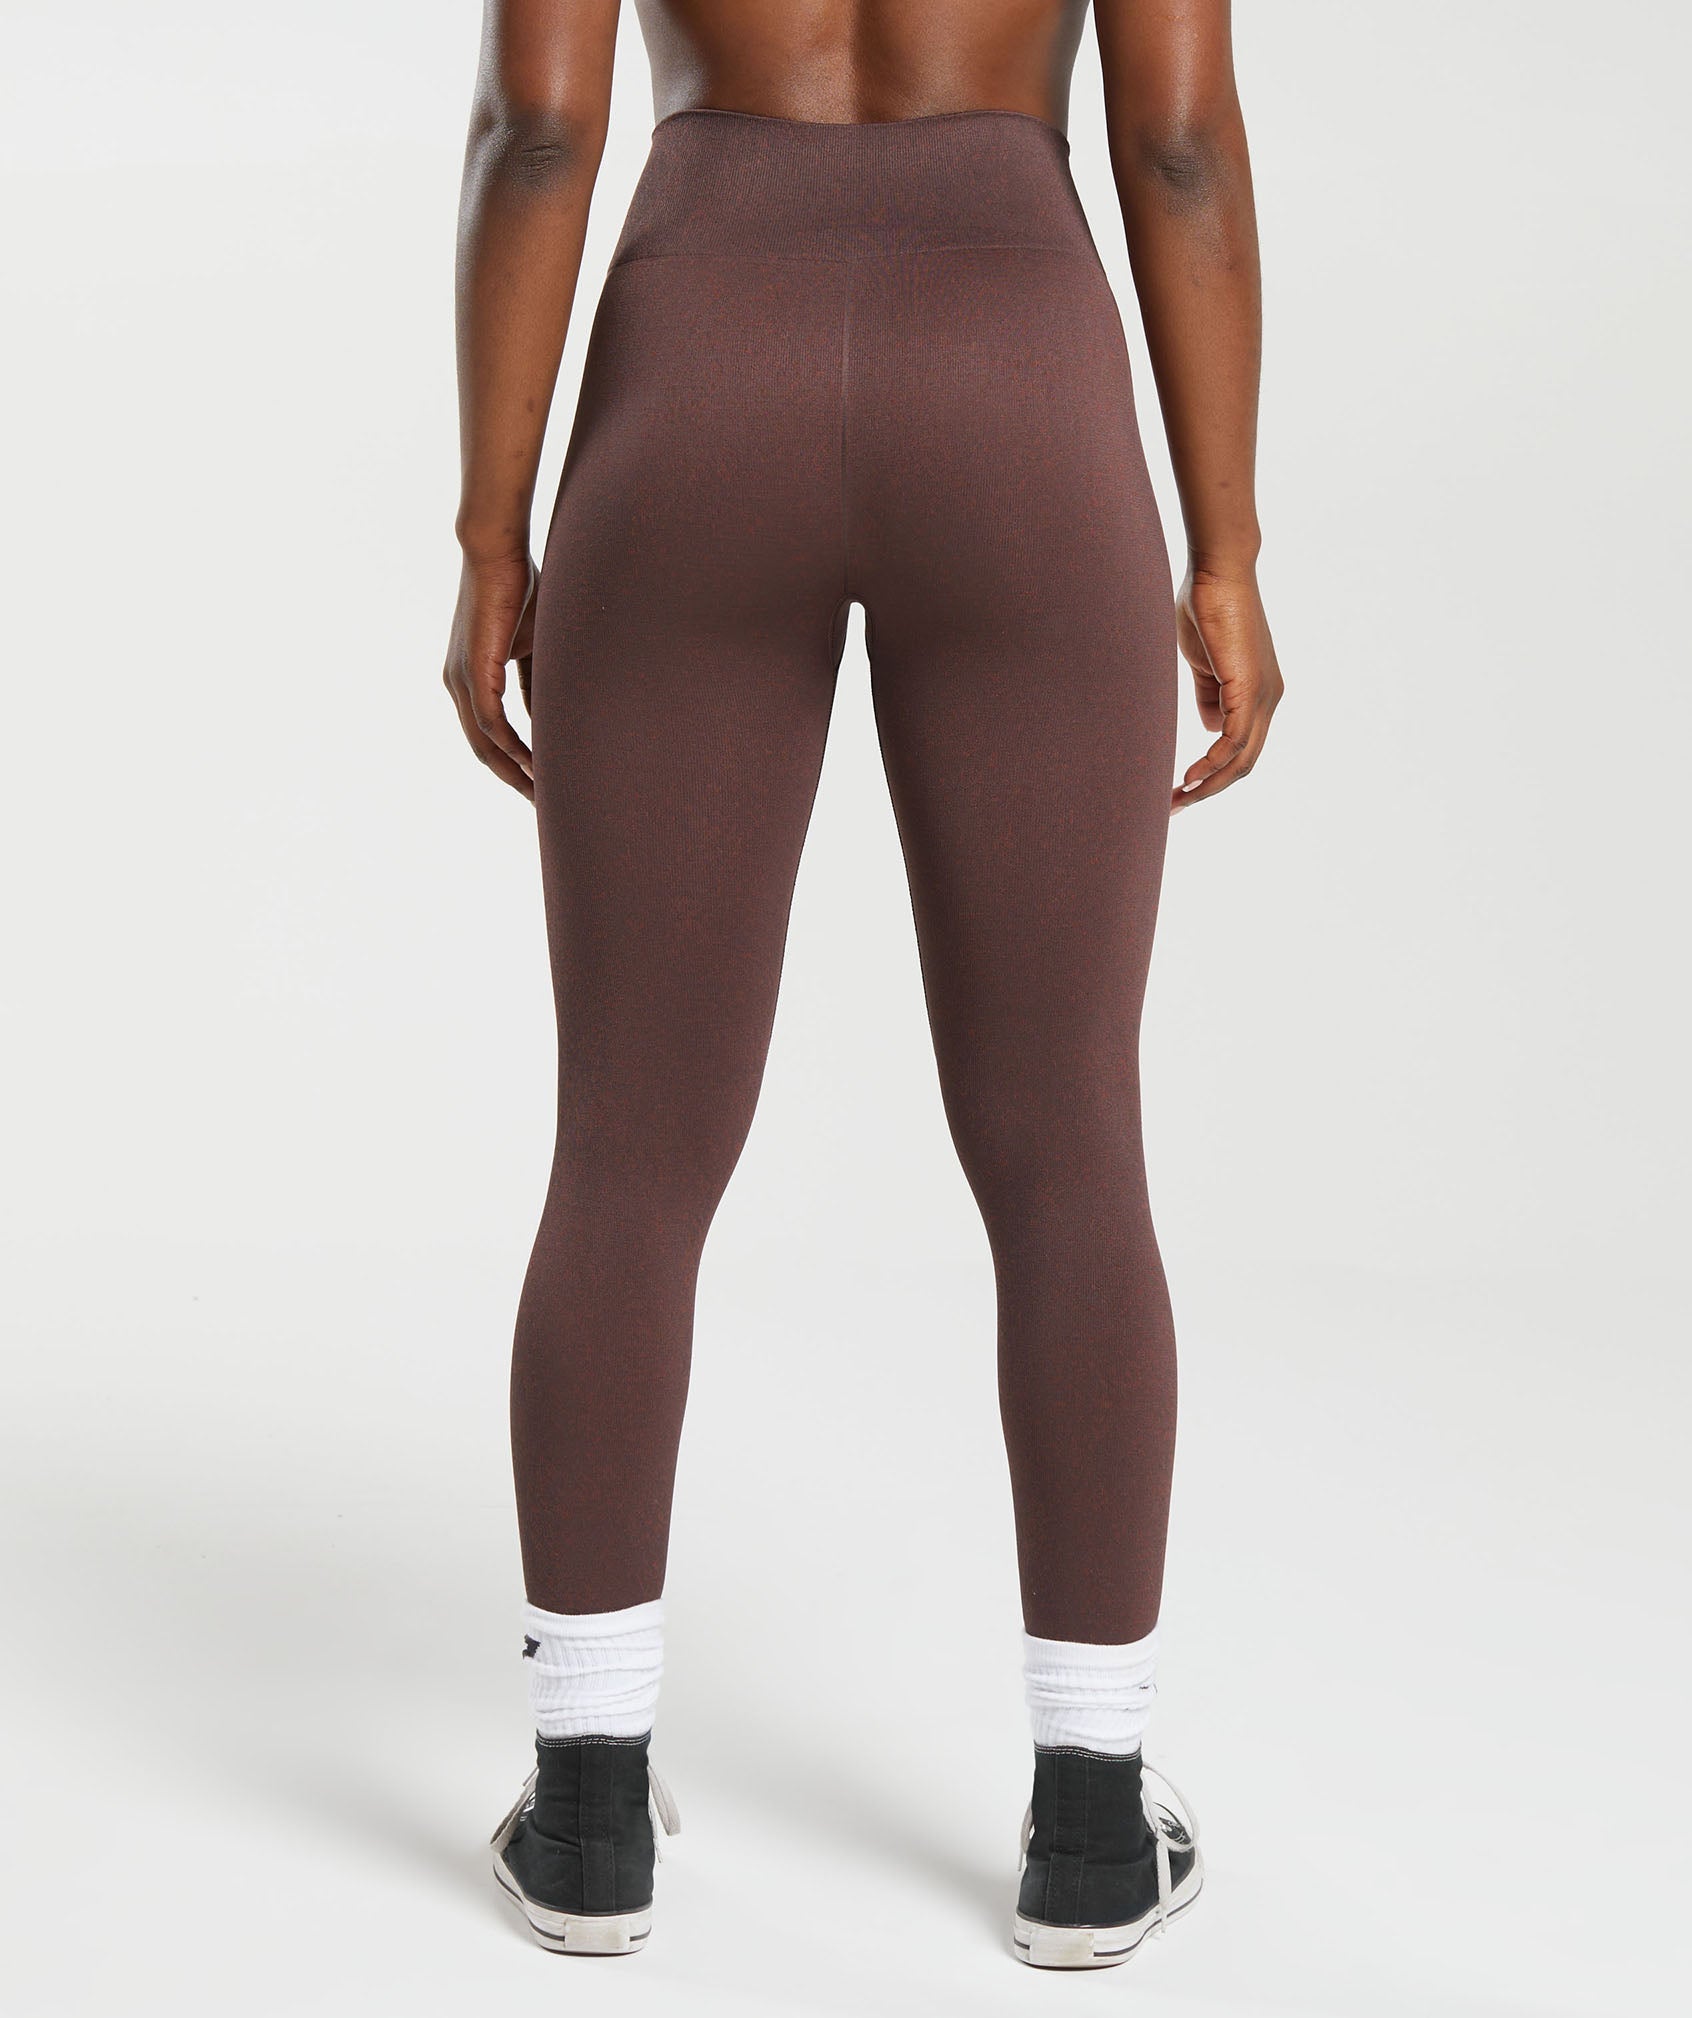 Almost Every Day Leggings - Chocolate